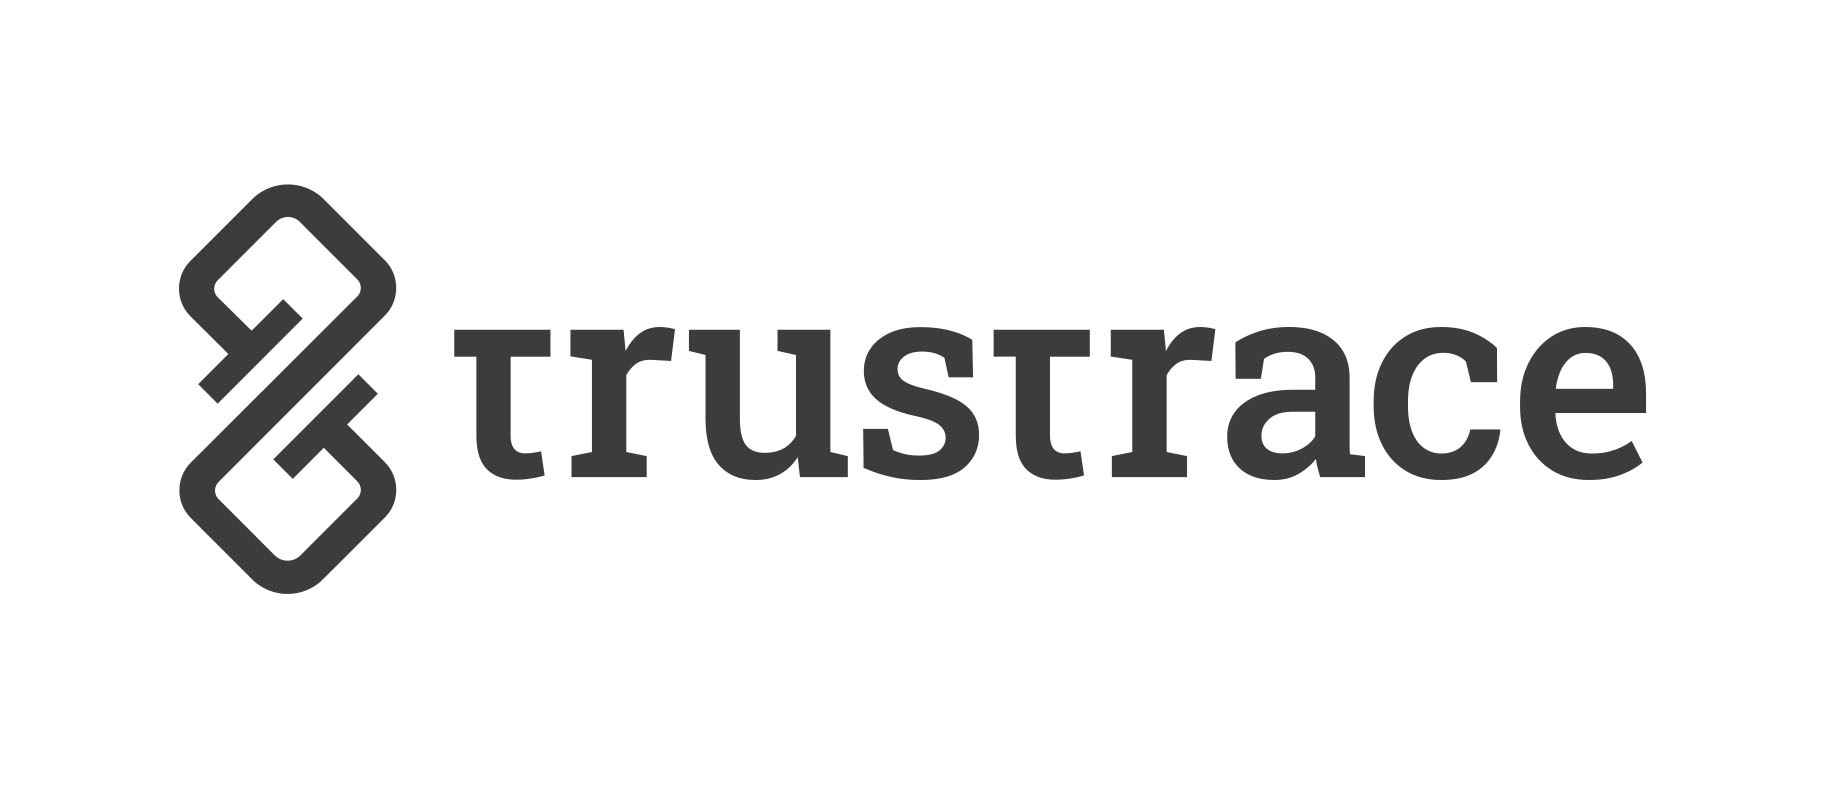 TrusTrace Closes $6 Million Series A Investment to Create More Sustainable,  Transparent Supply Chains for Global Brands | Business Wire